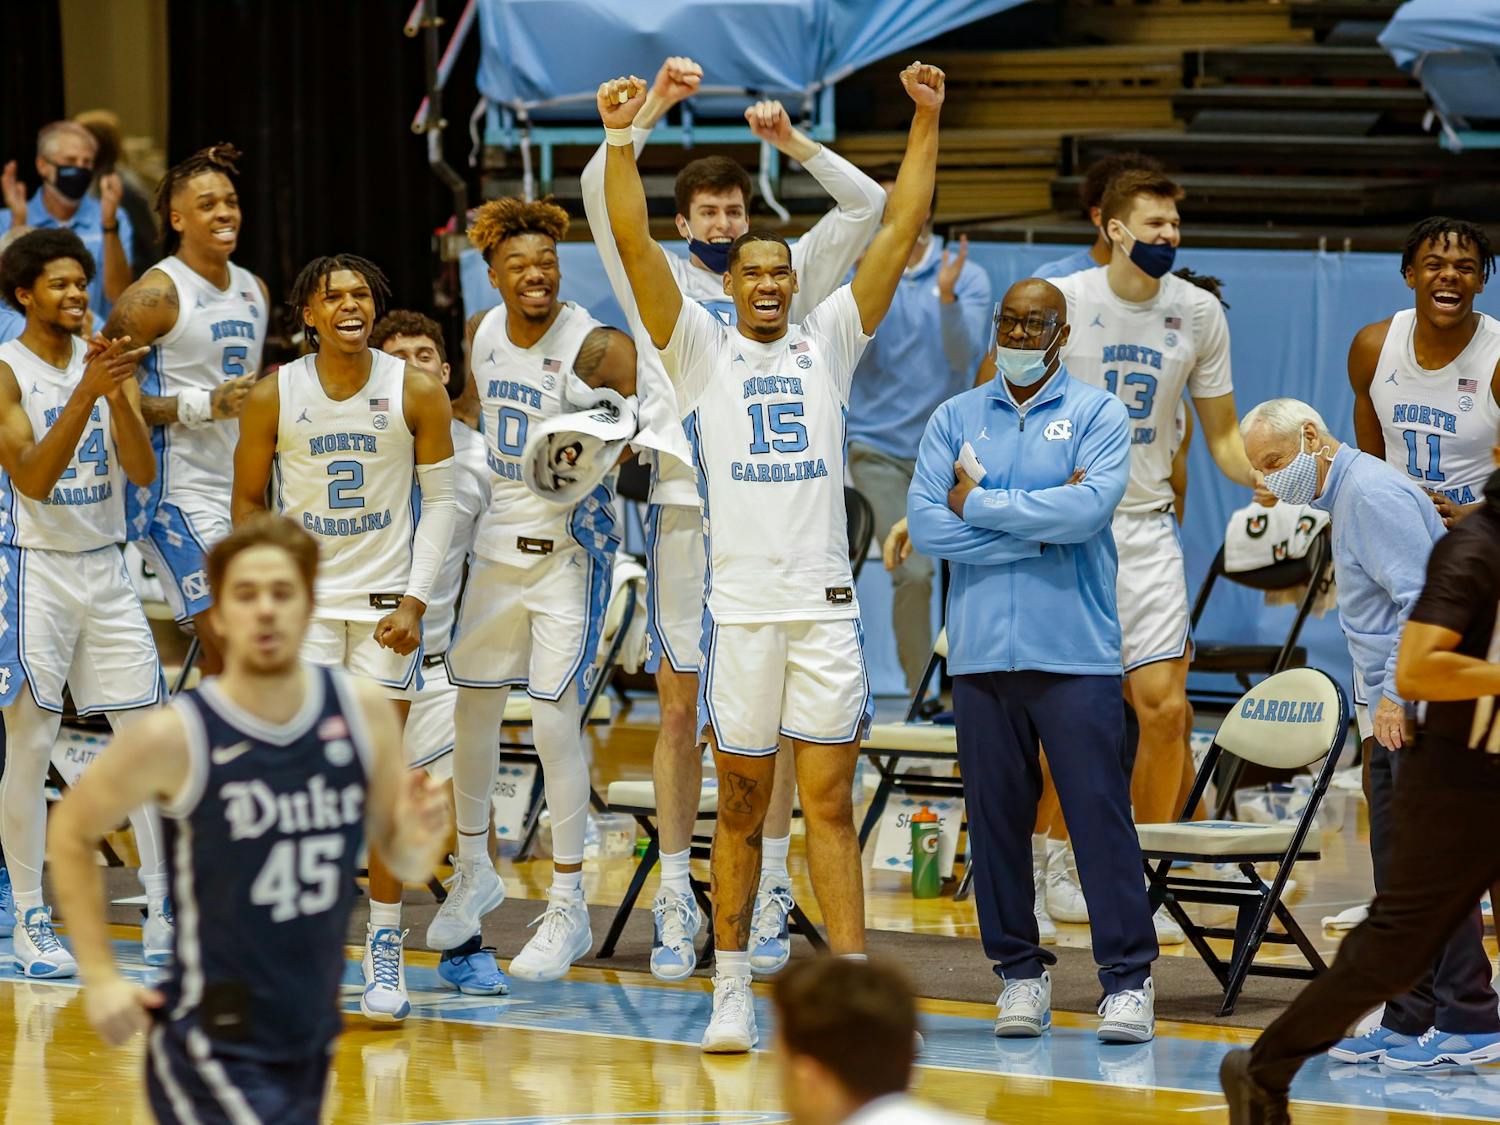 Nc Tar Heels Basketball Schedule 2022 Unc Men's Basketball Team Releases Conference Schedule For 2021-22 Season -  The Daily Tar Heel